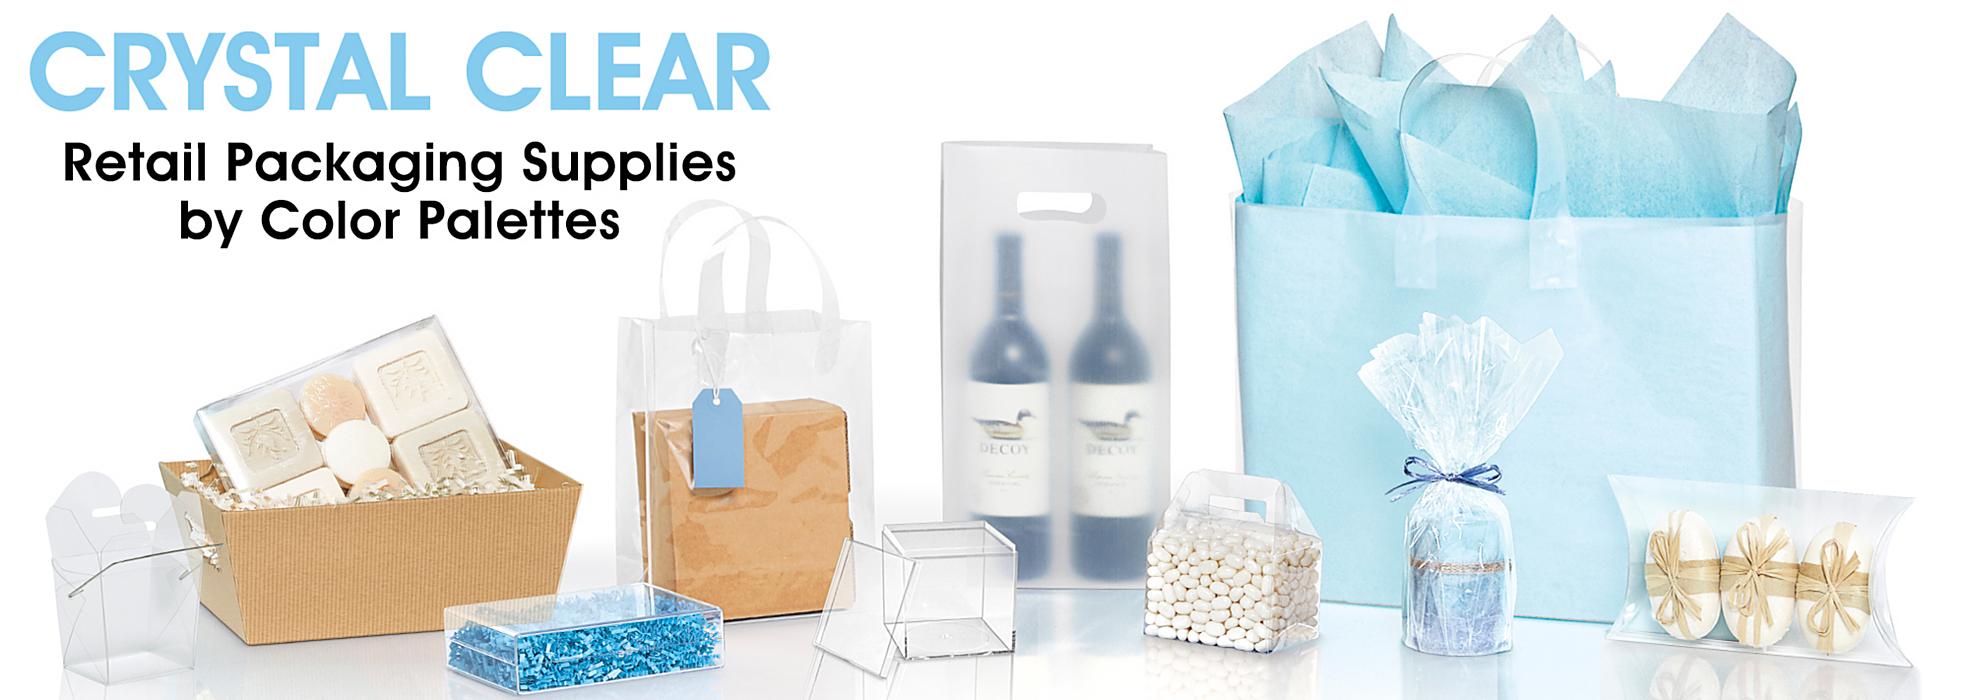 Crystal Clear - Retail Packaging Supplies by Color Palettes